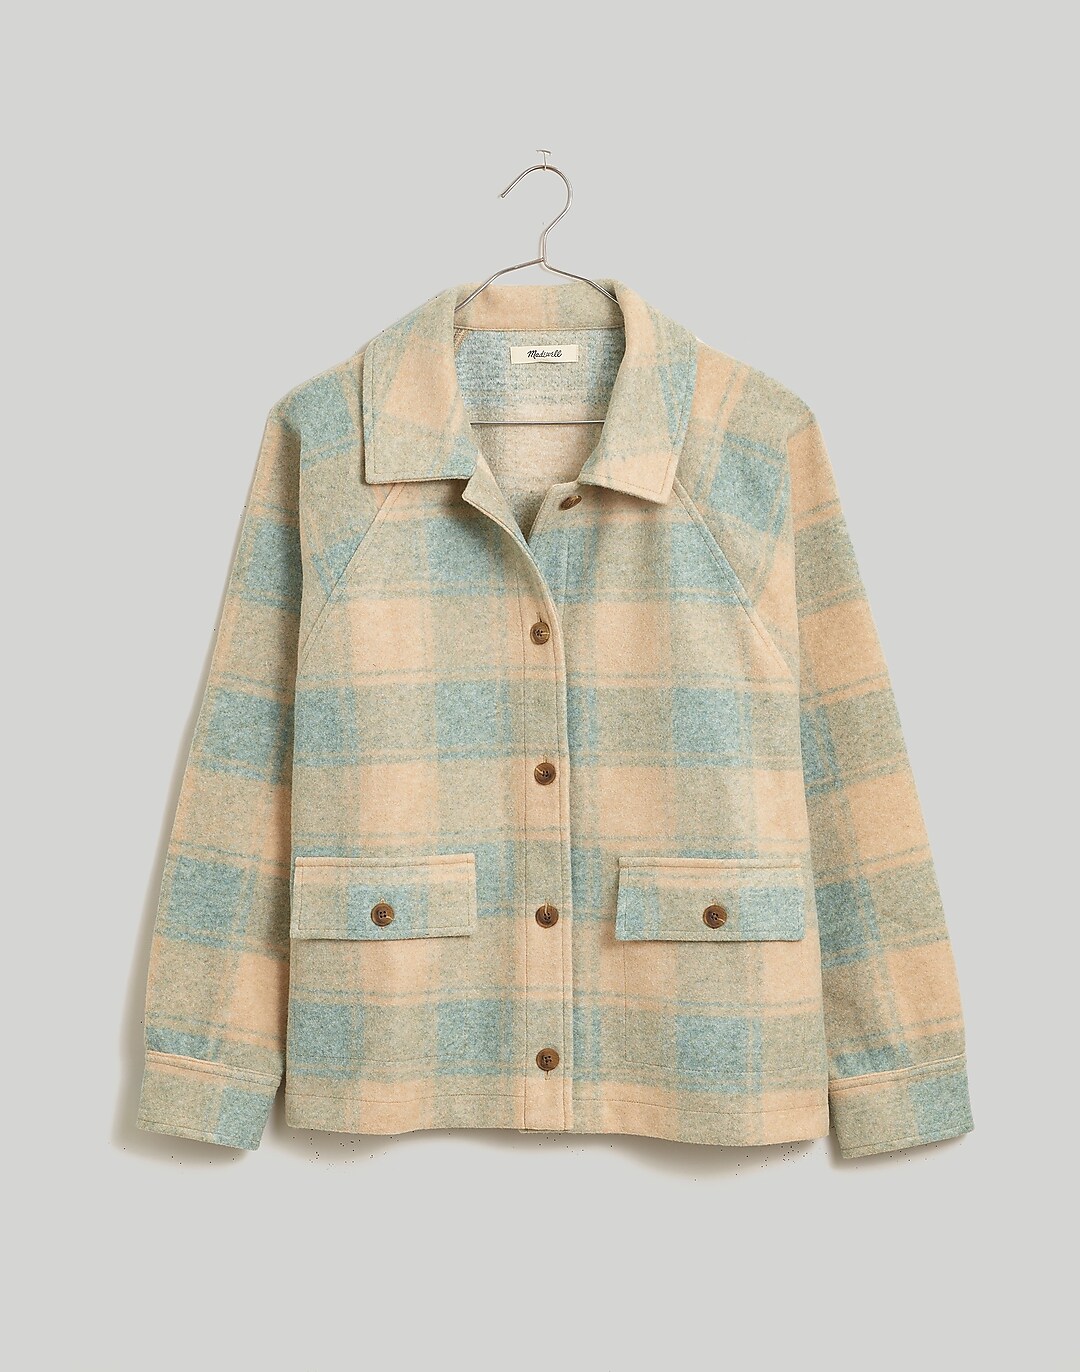 Brushed Jacquard Wrap-Front Cardigan in Plaid by Madewell for $30